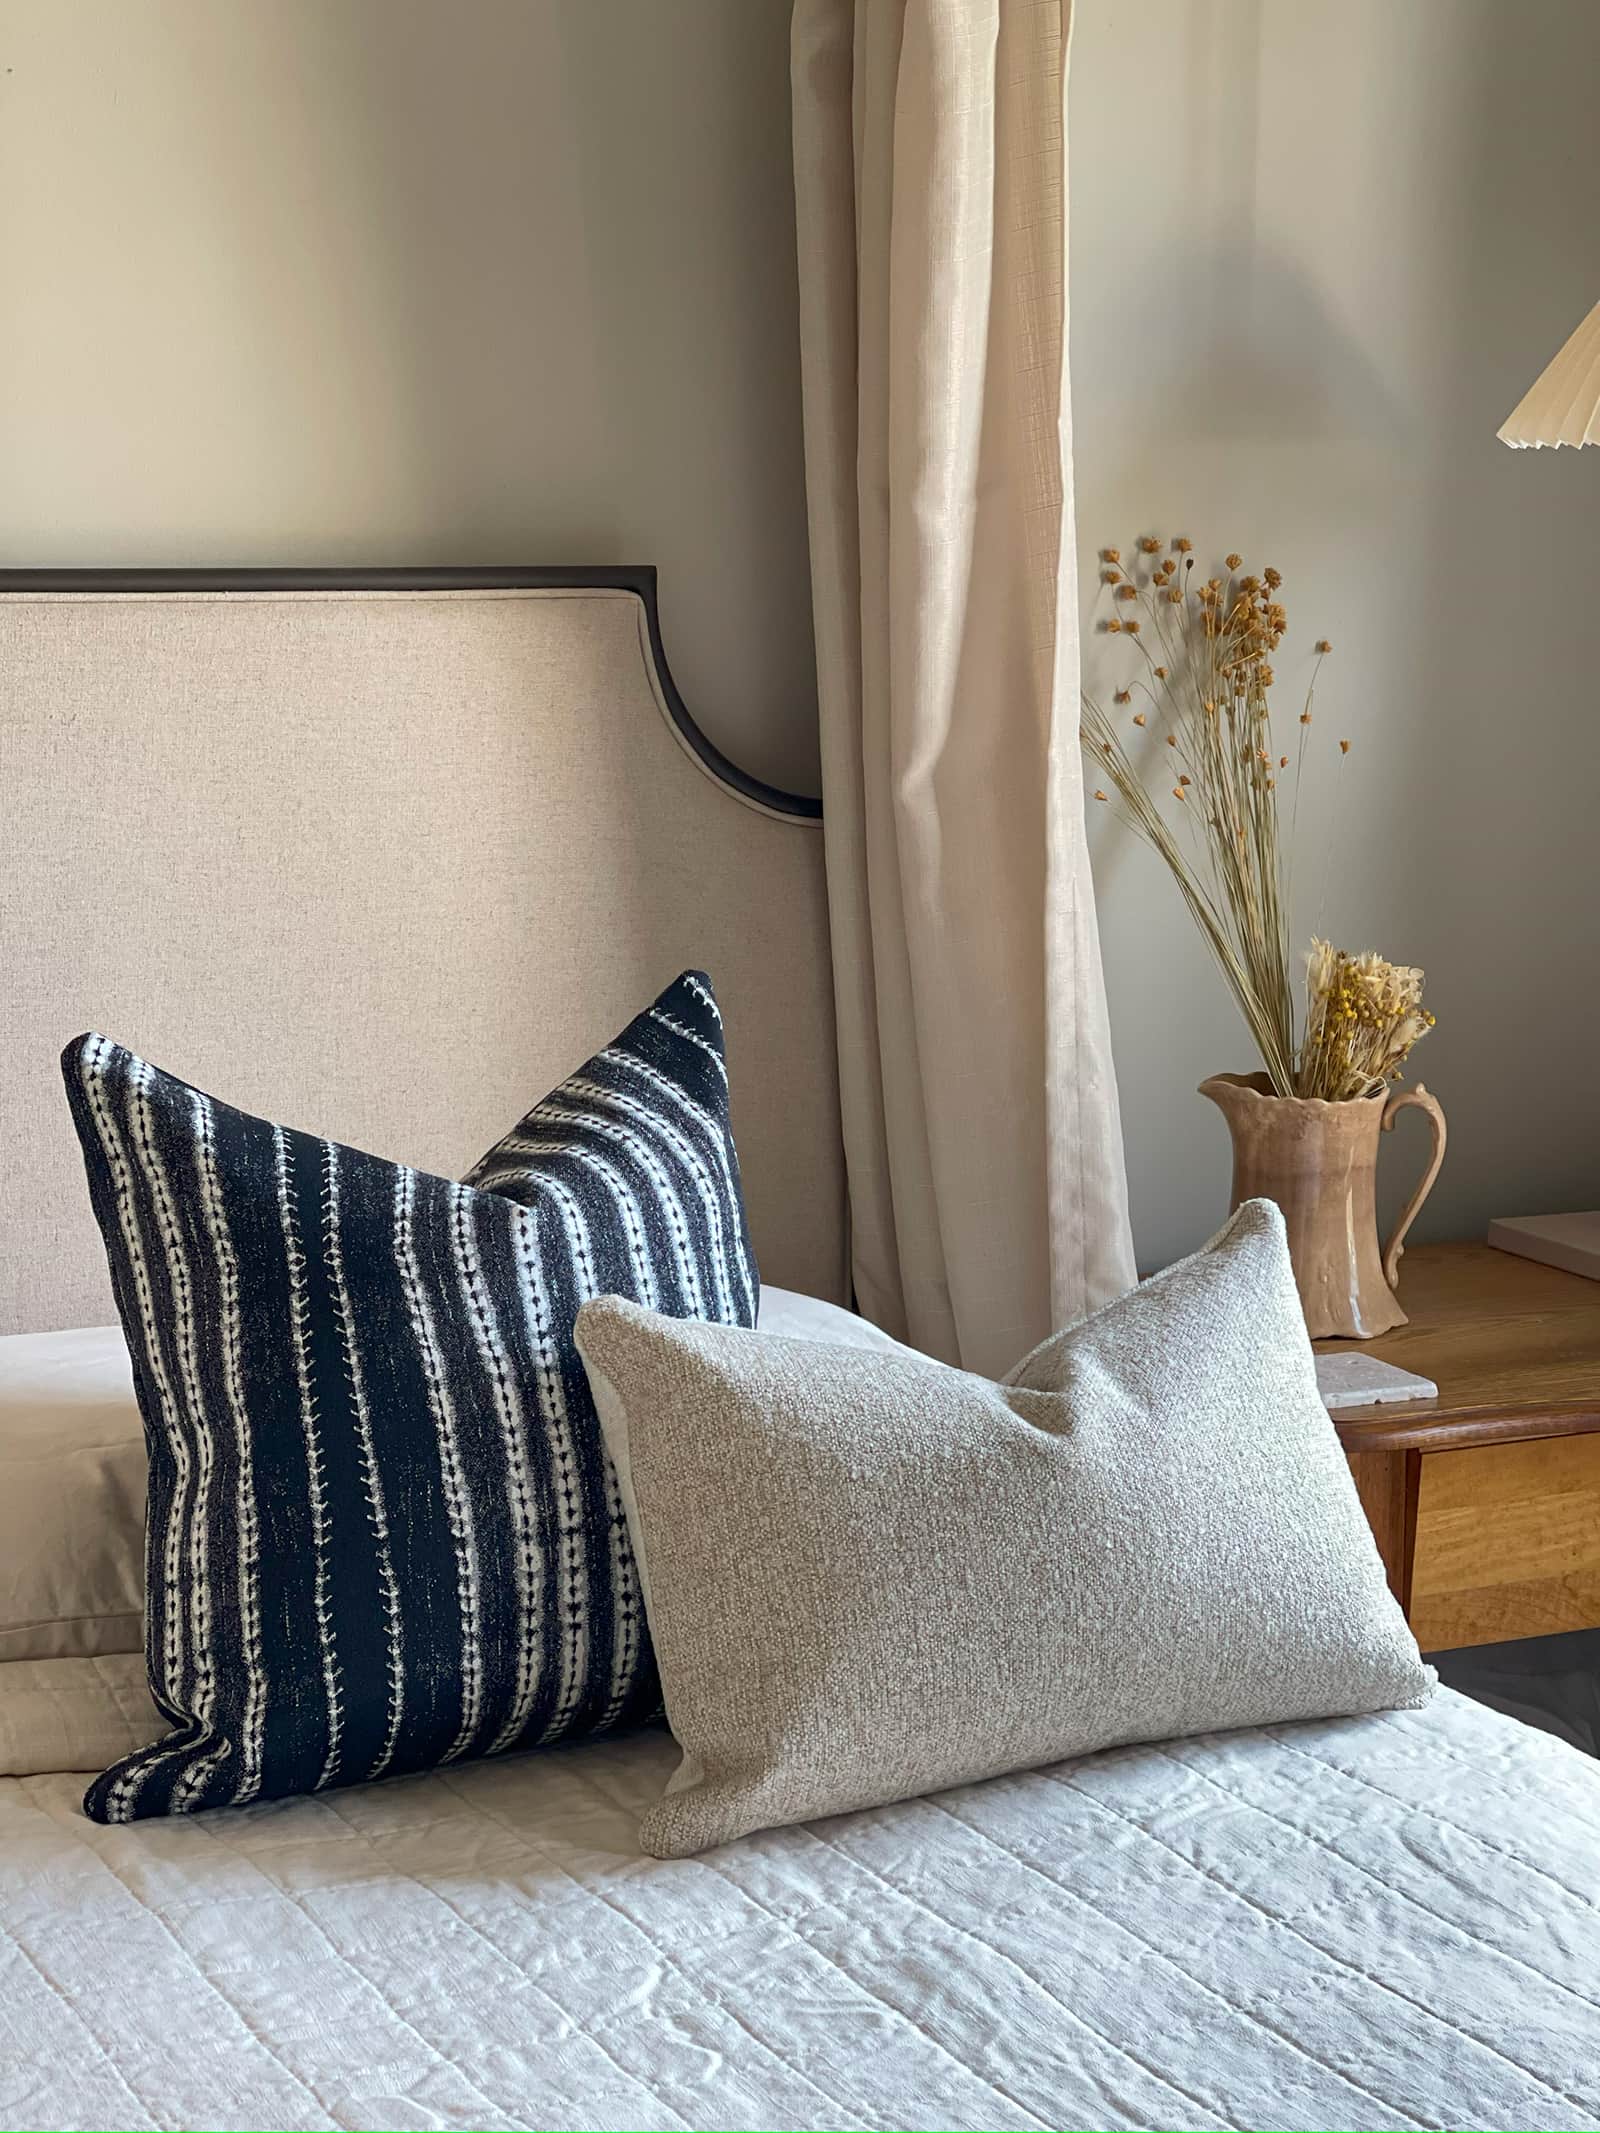 Pillow set for neutral colored bed, featuring a decorative throw pillow in contrasting indigo and white stripes